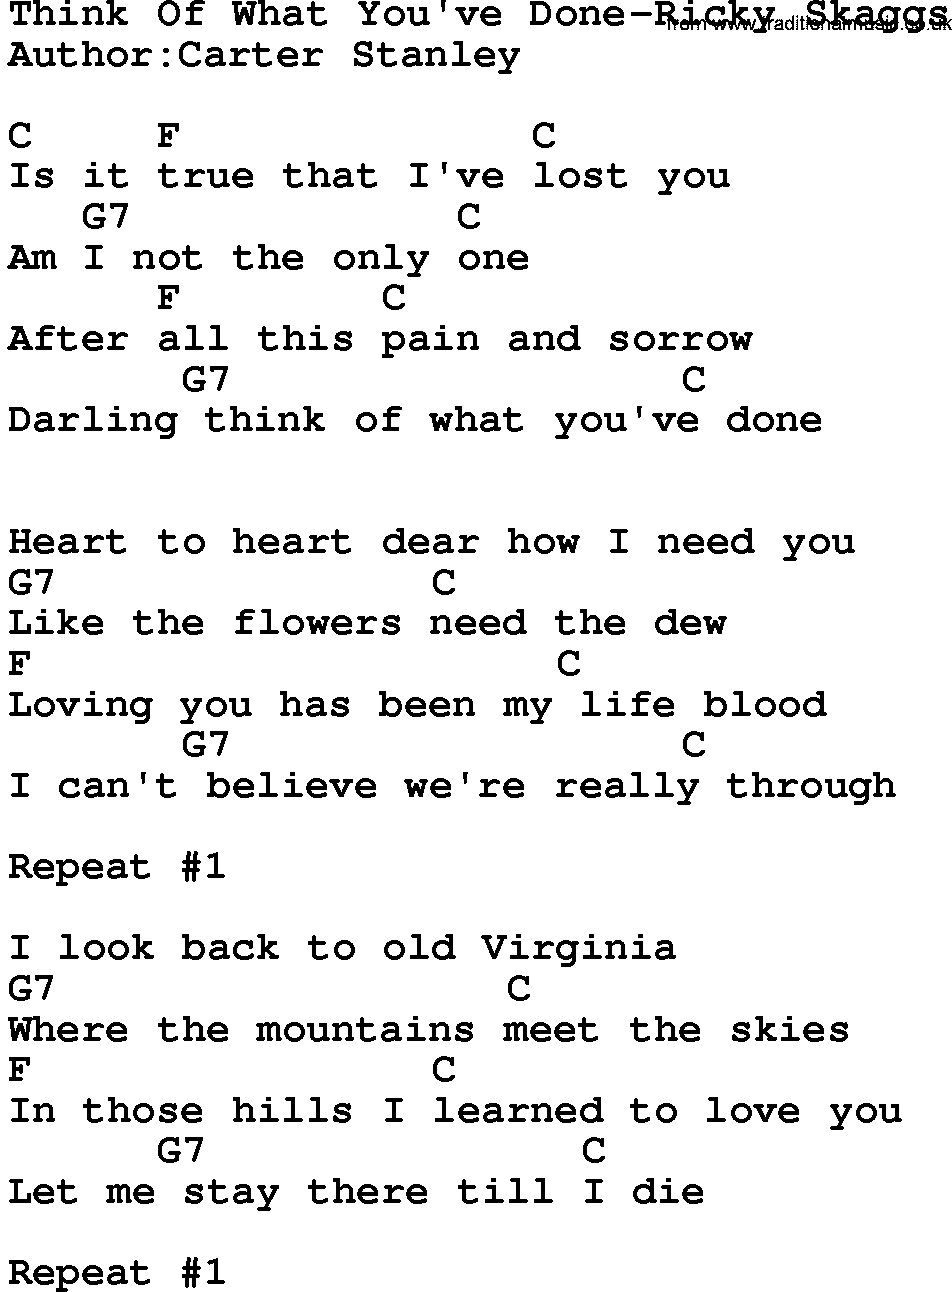 Country music song: Think Of What You've Done-Ricky Skaggs lyrics and chords